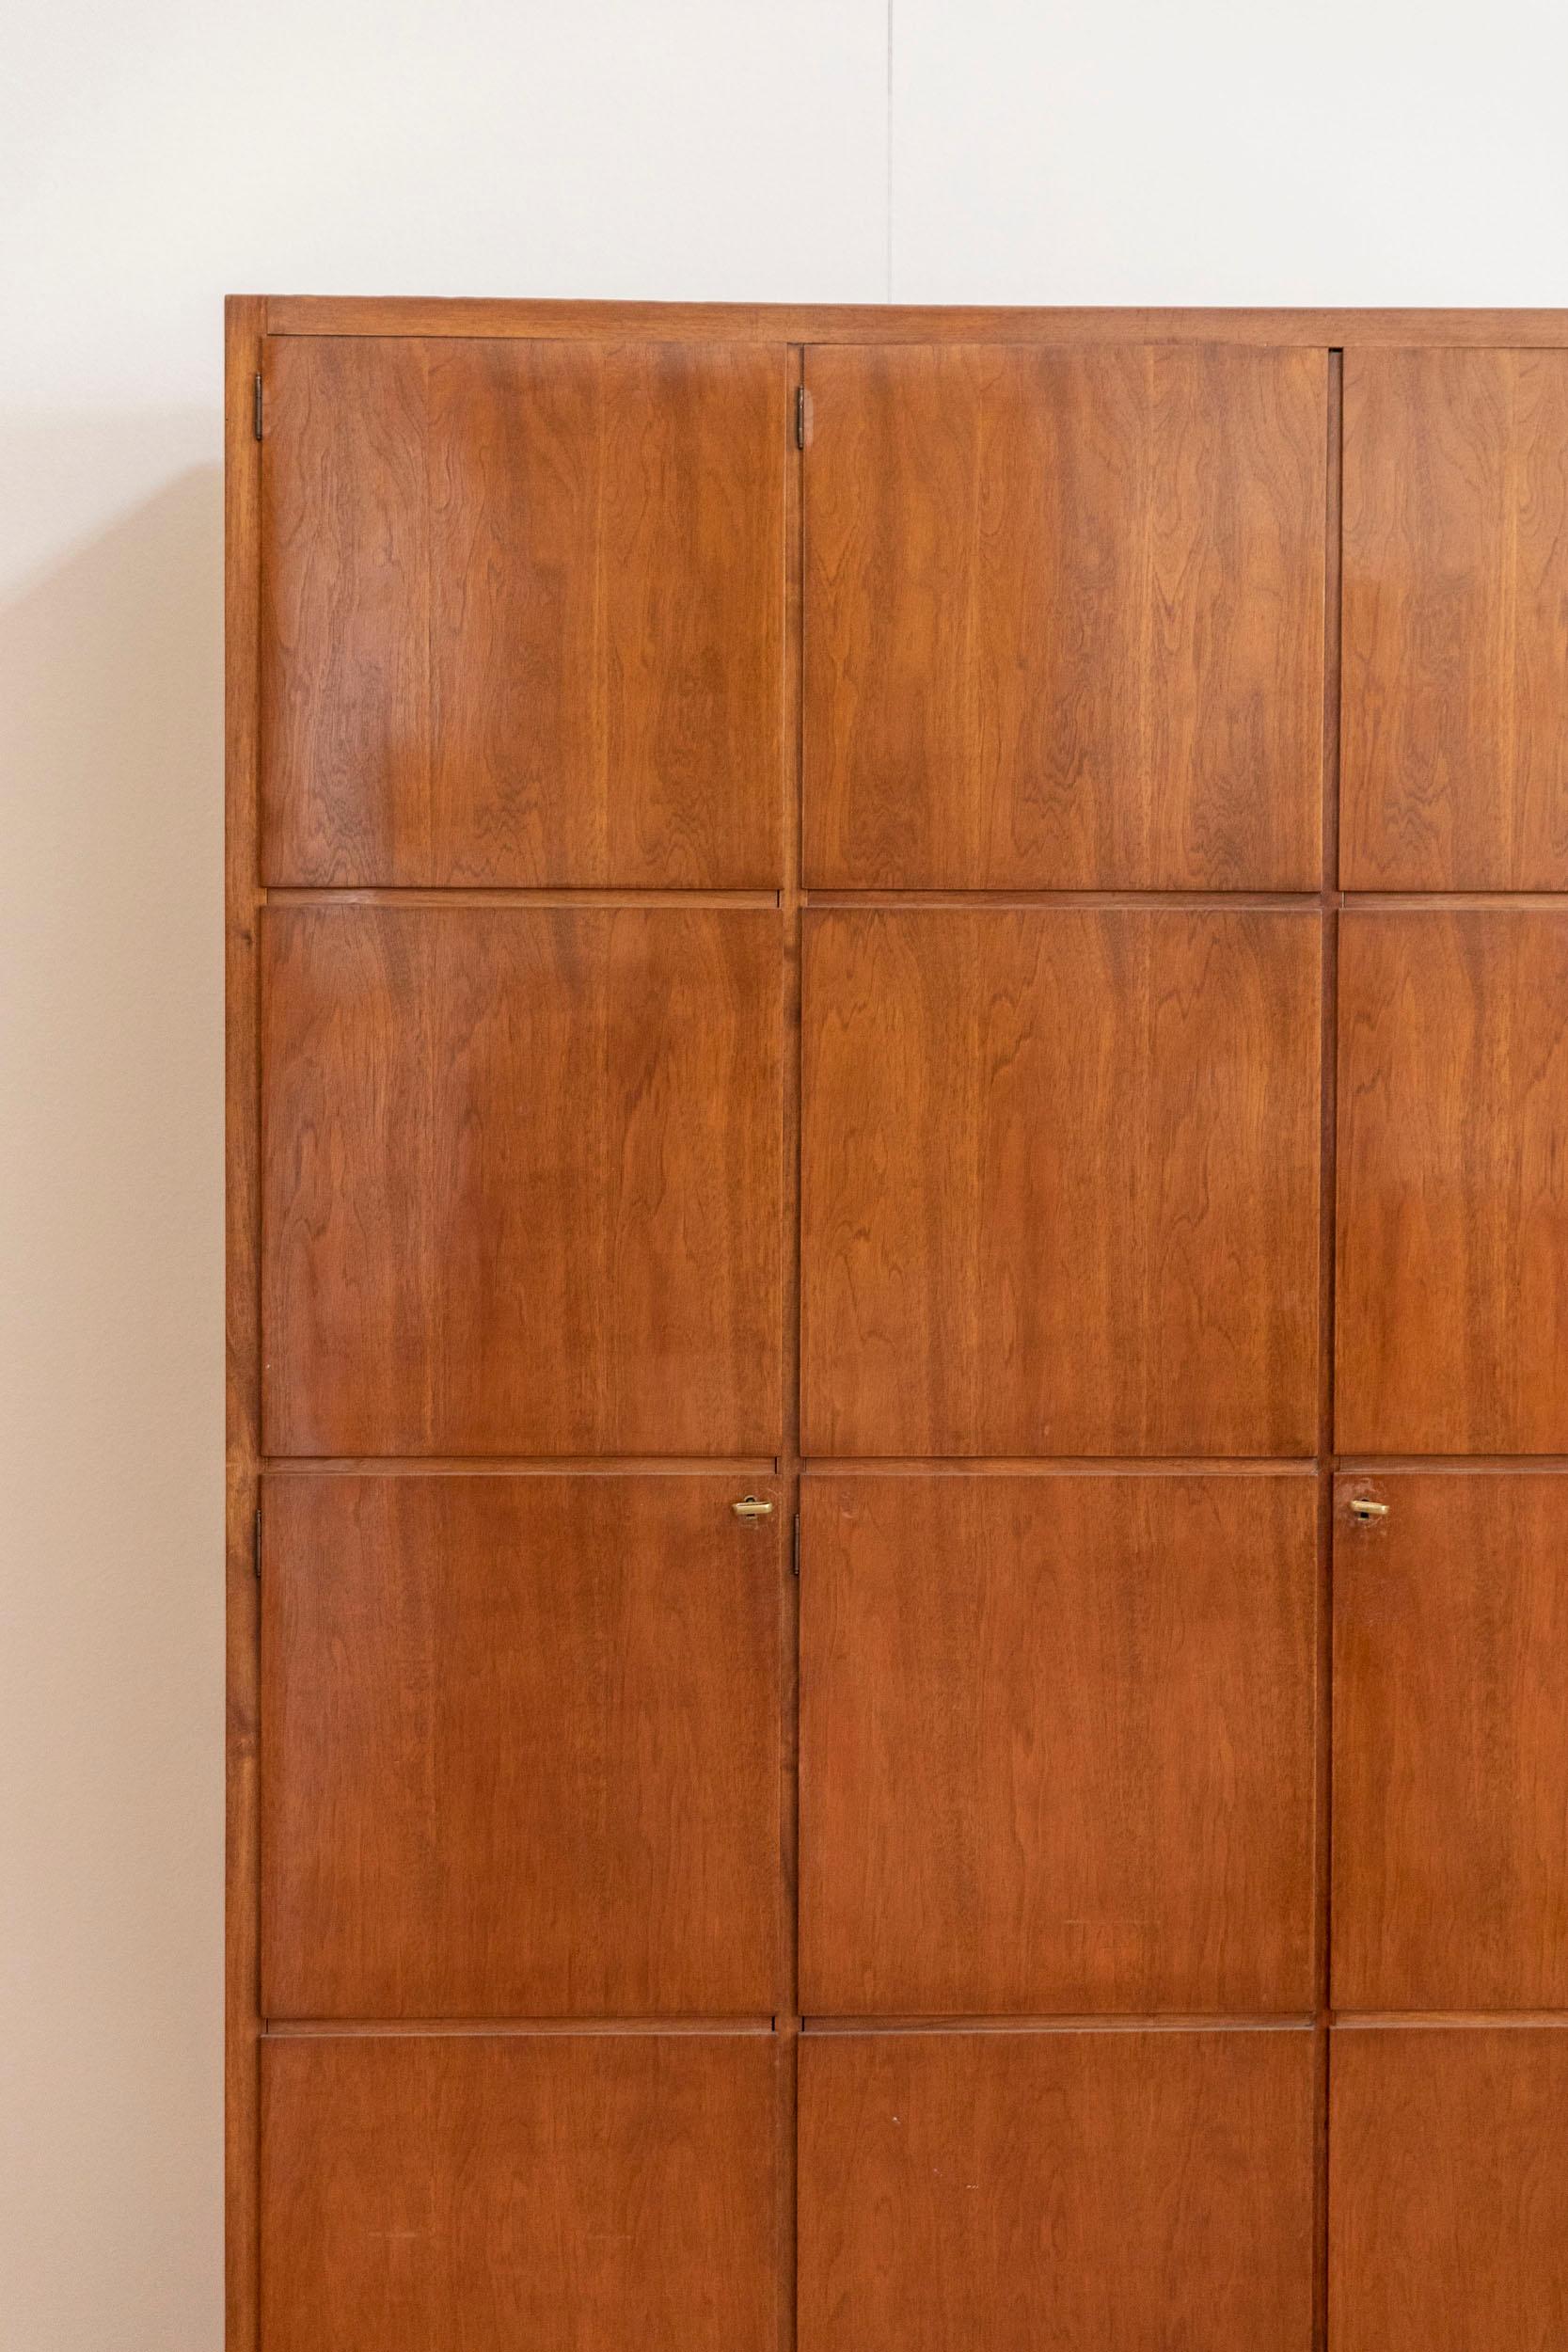 Two door wardrobe attributed to Paolo Buffa.
This armoire, made in walnut wood present a geometrical grid decoration with twelve section.
The interiors differ from each side, the left side has three shelves and two drawers, the right side present